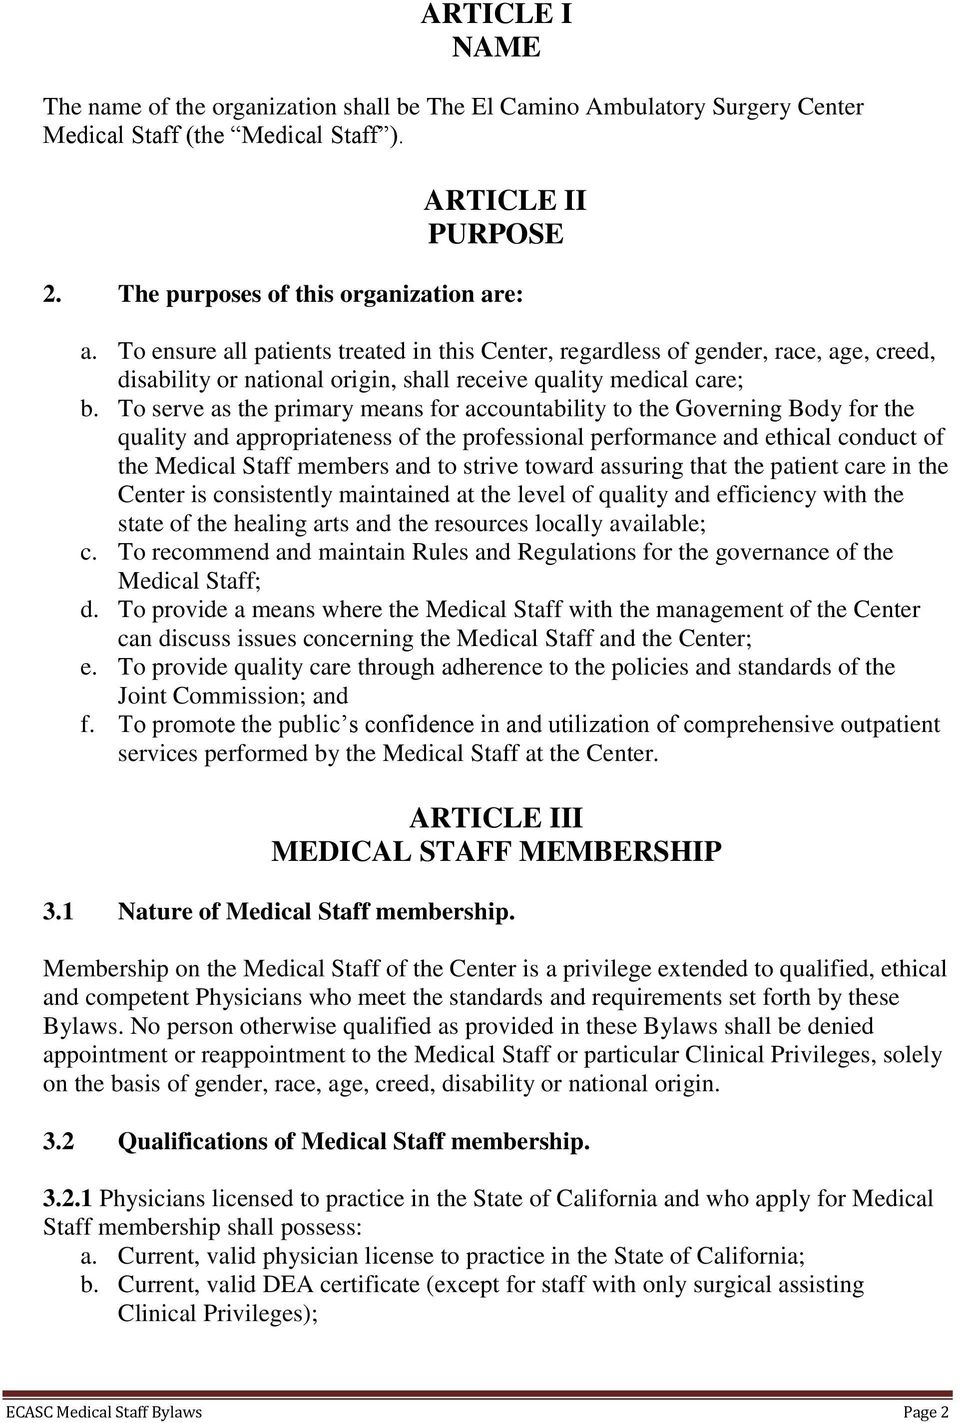 To serve as the primary means for accountability to the Governing Body for the quality and appropriateness of the professional performance and ethical conduct of the Medical Staff members and to